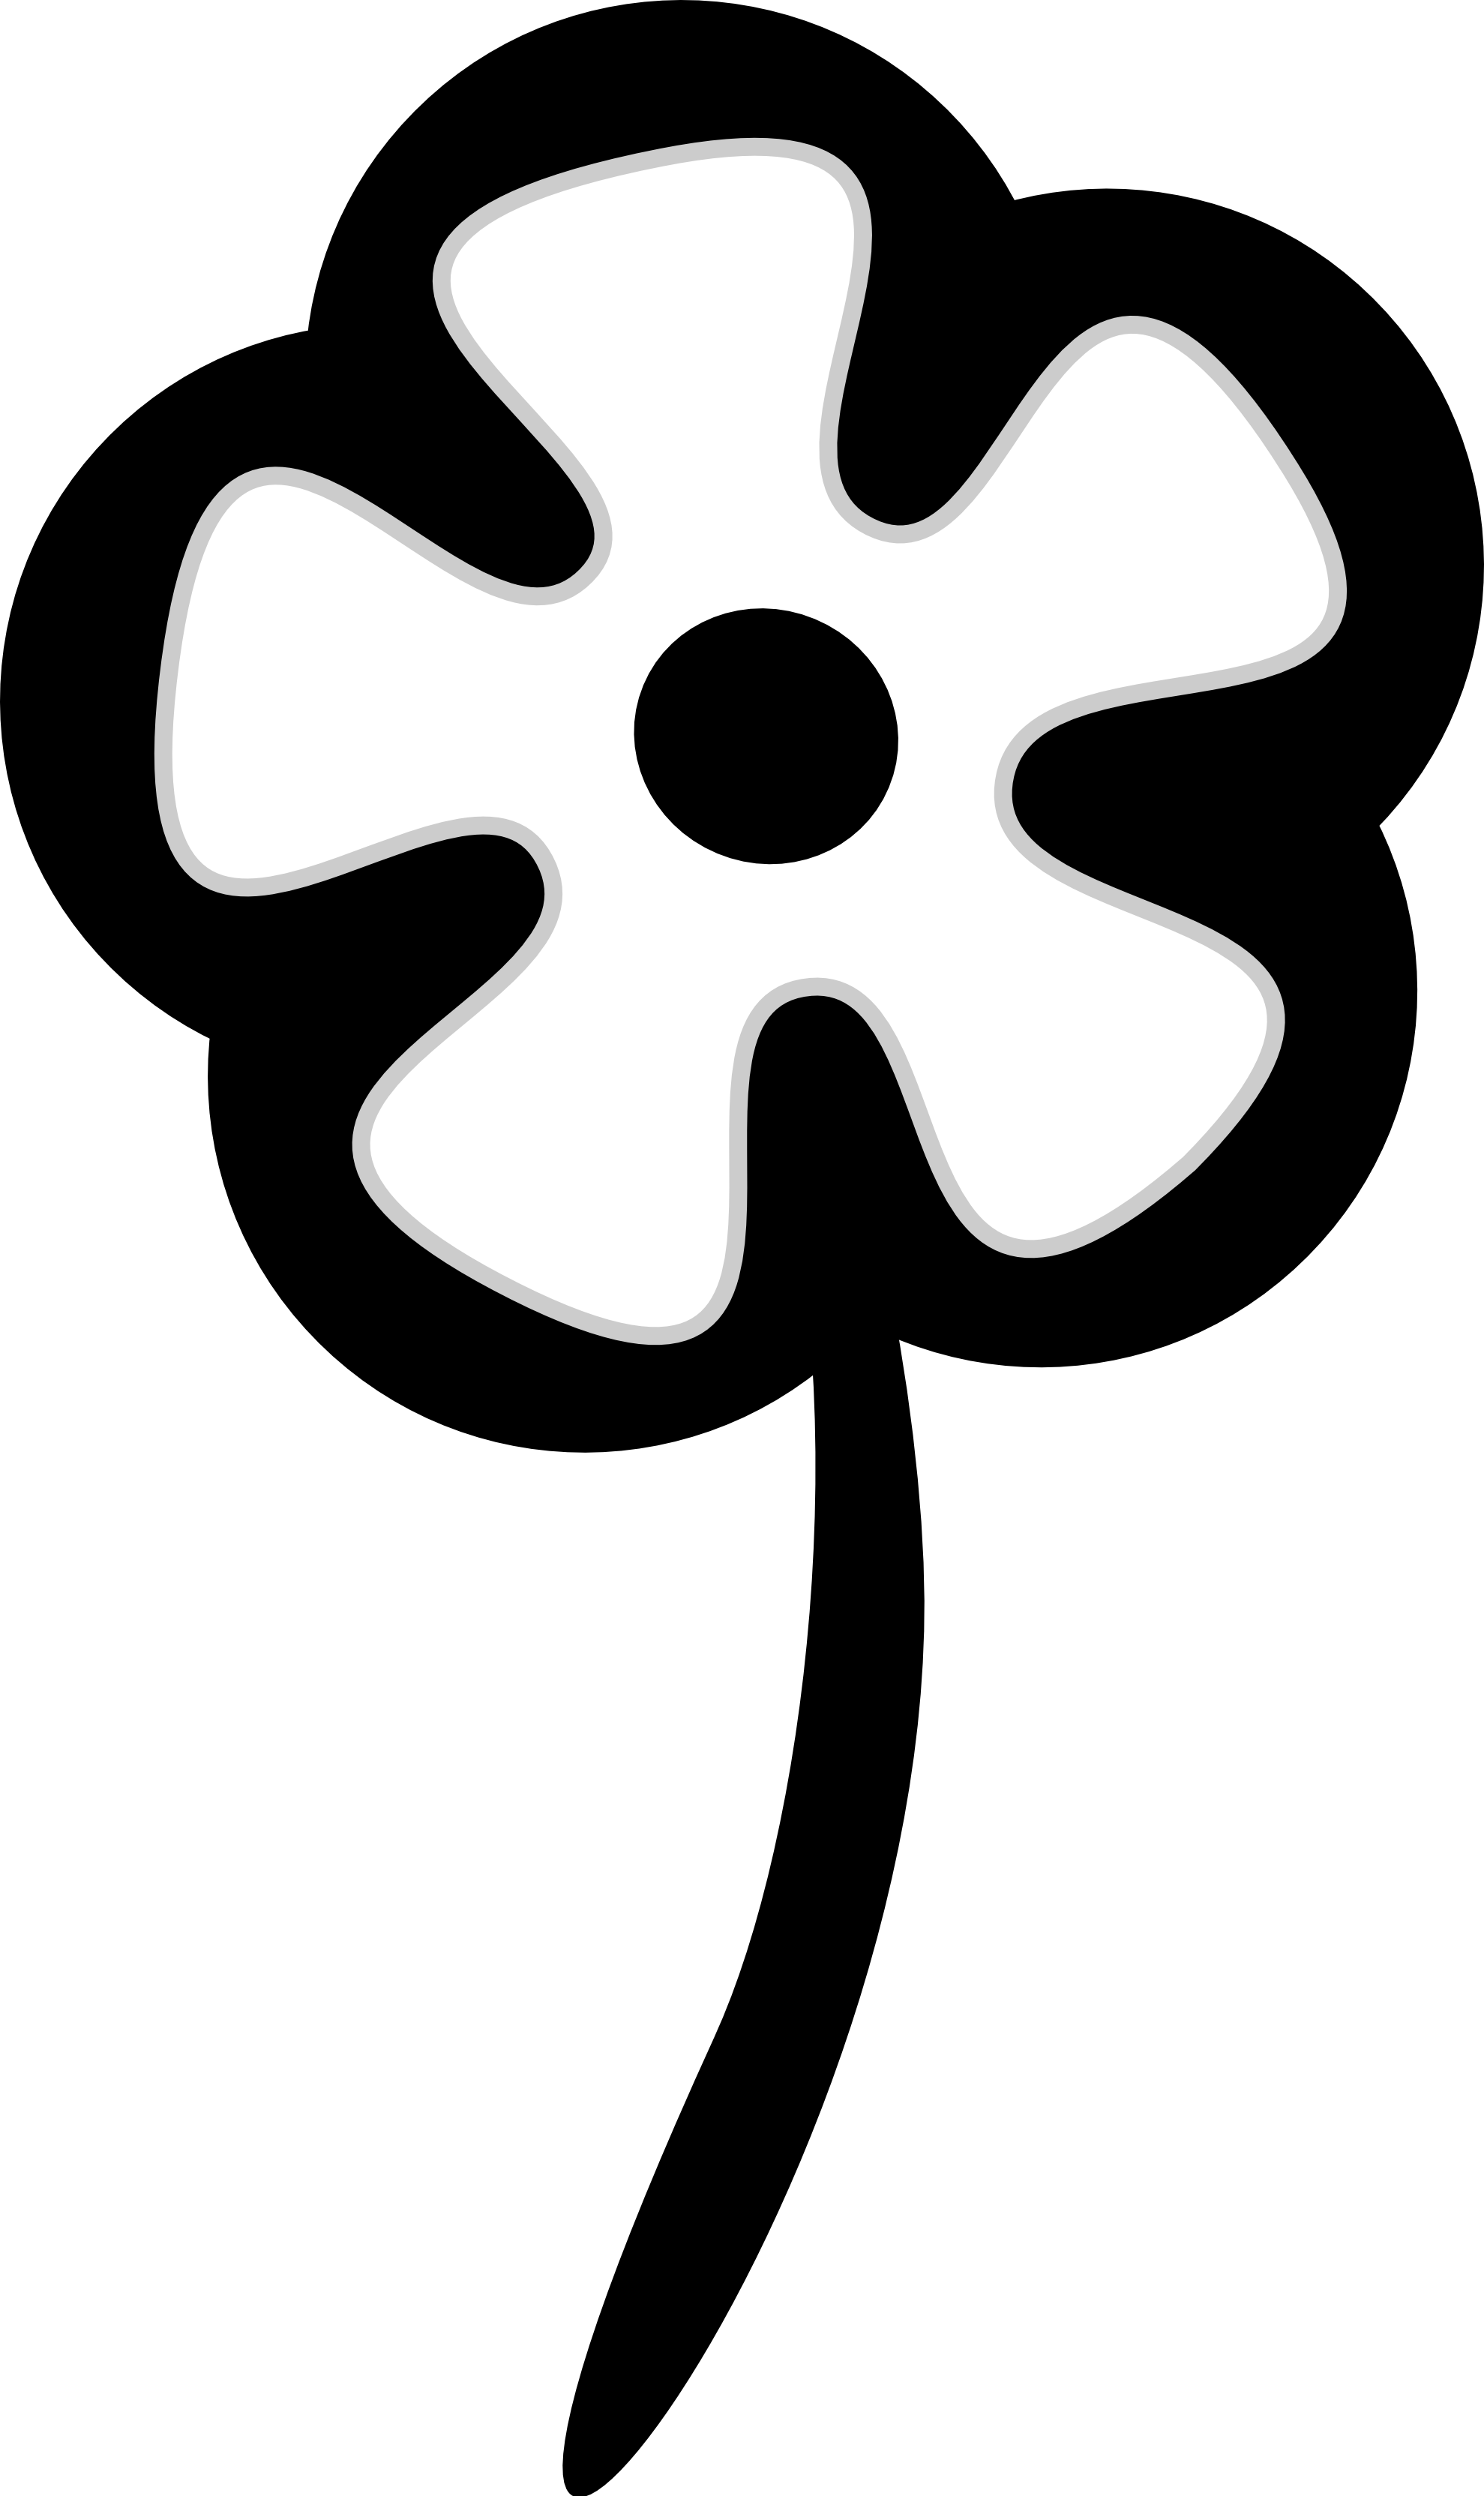 flower-black-and-white-flowers-black-and-white-clip-art-image